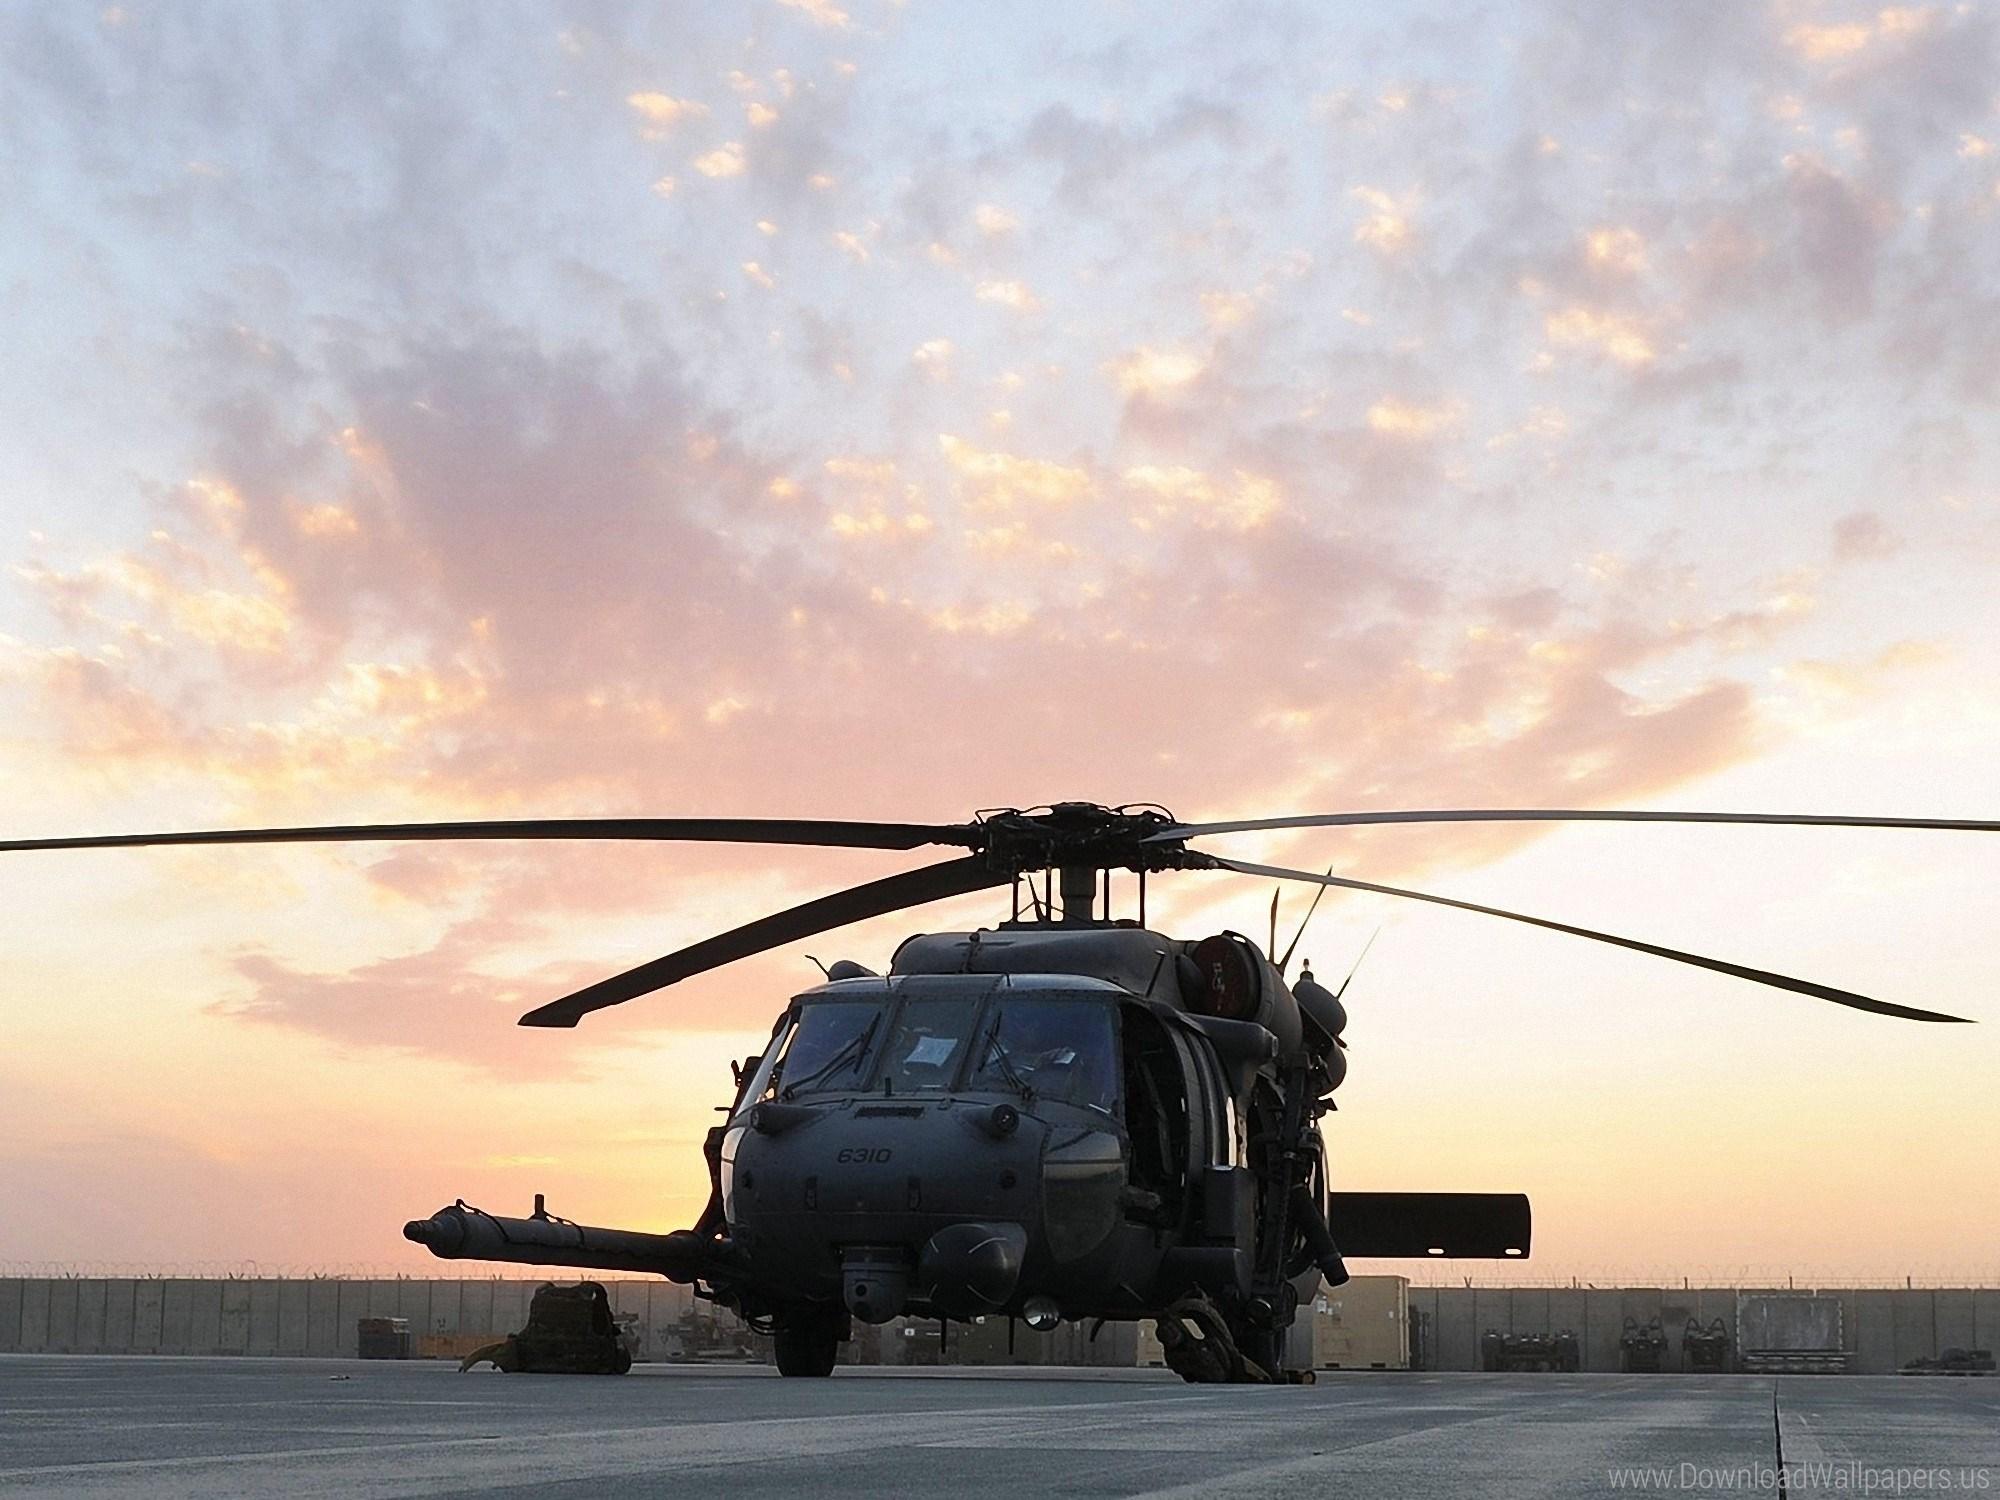 Helicopter, Hh 60g, Pave Hawk, Sh Sikorsky, Sunset, The Blade